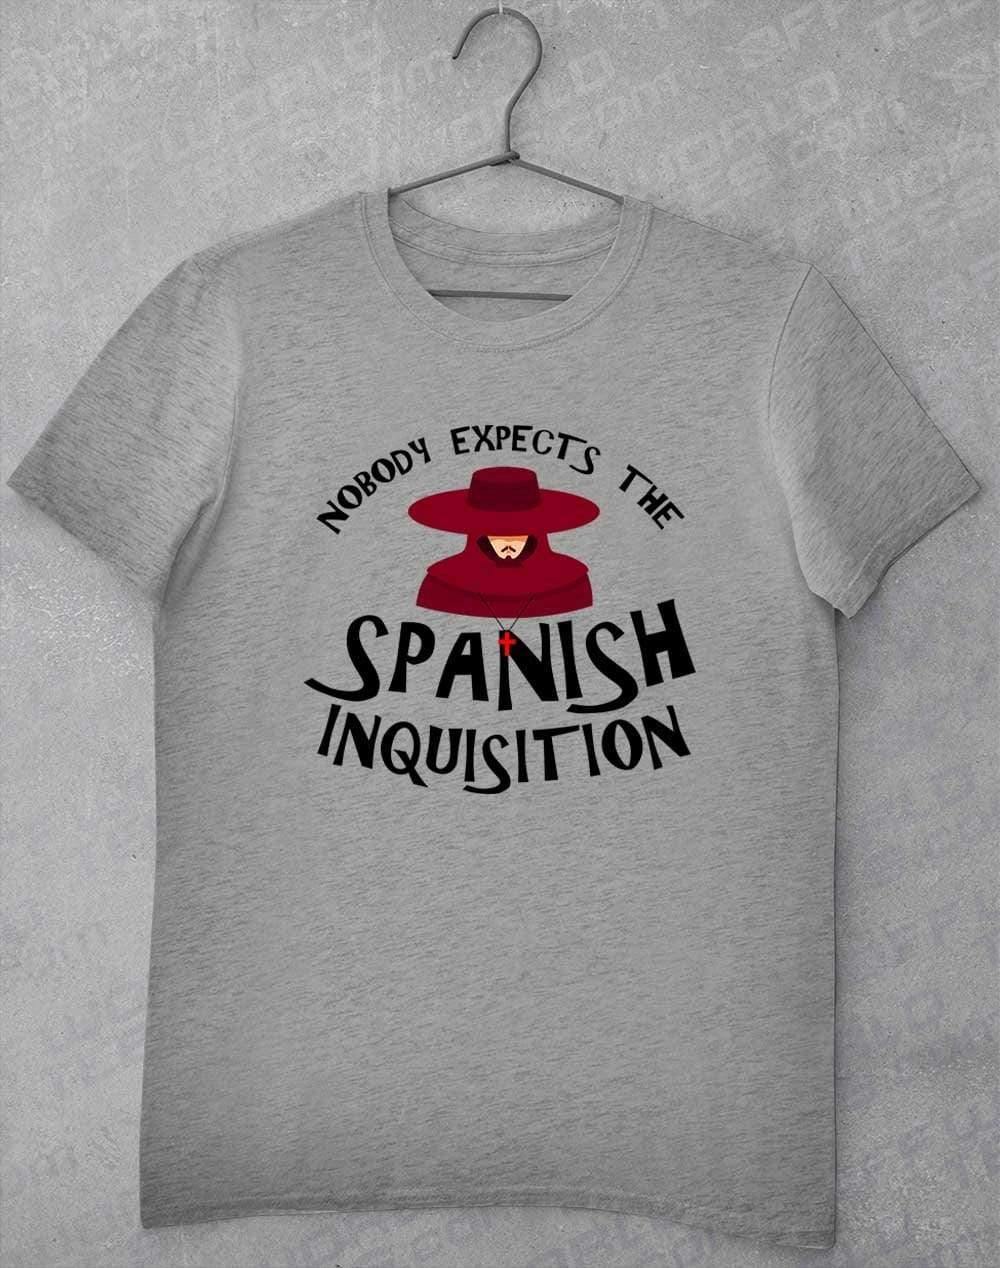 Nobody Expects the Spanish Inquisition T-Shirt S / Heather Grey  - Off World Tees